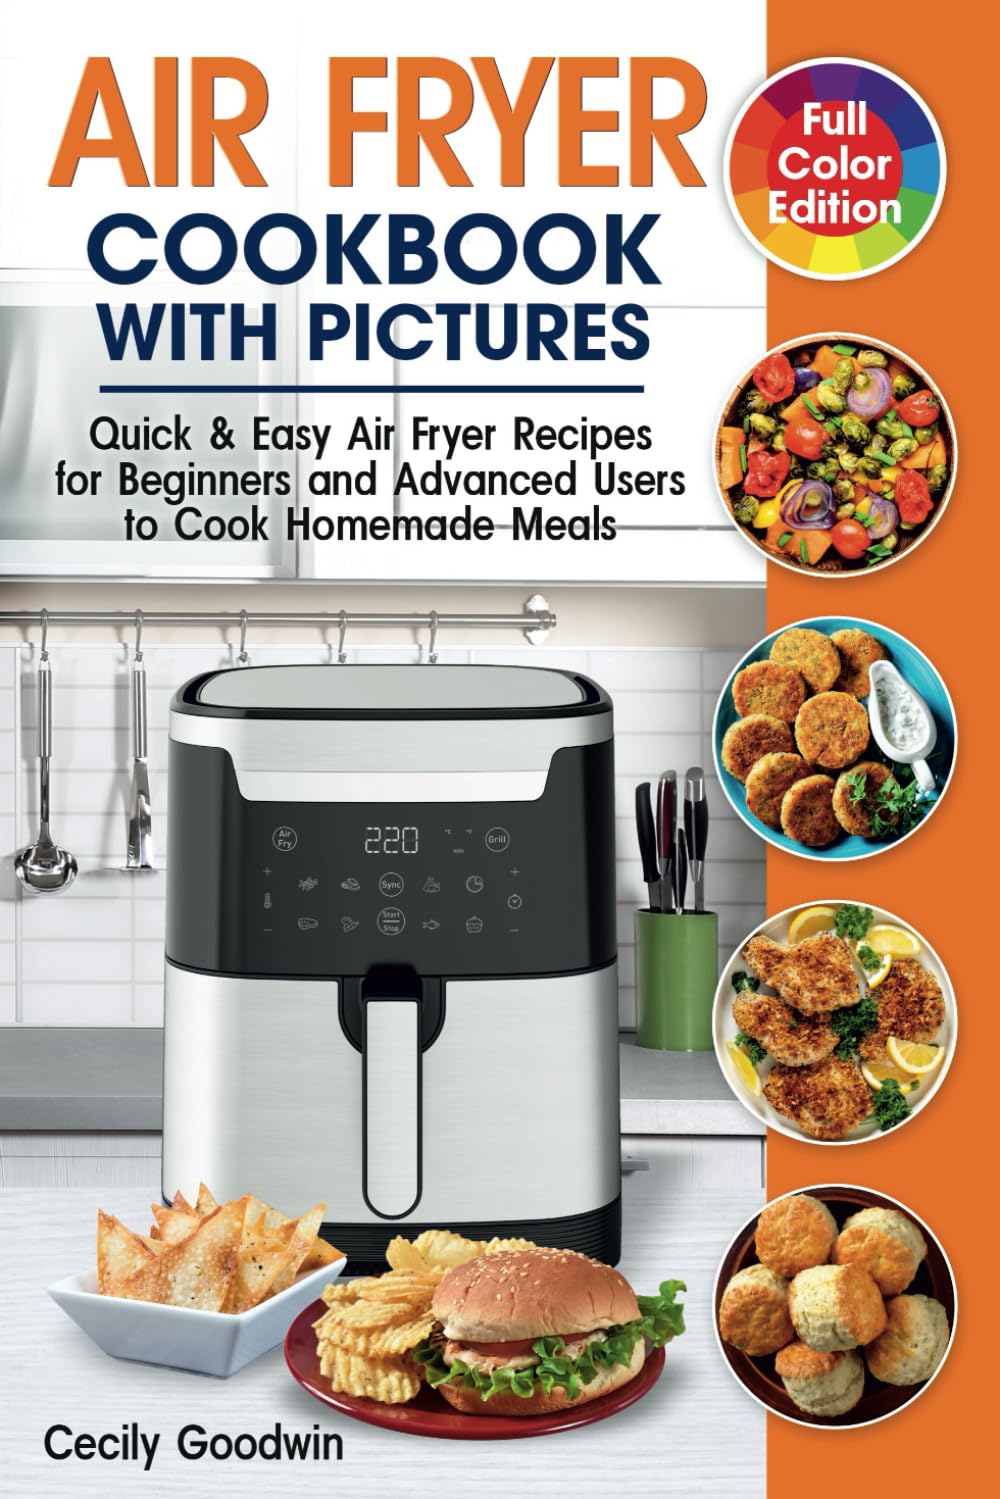 Air Fryer Cookbook with Pictures Review